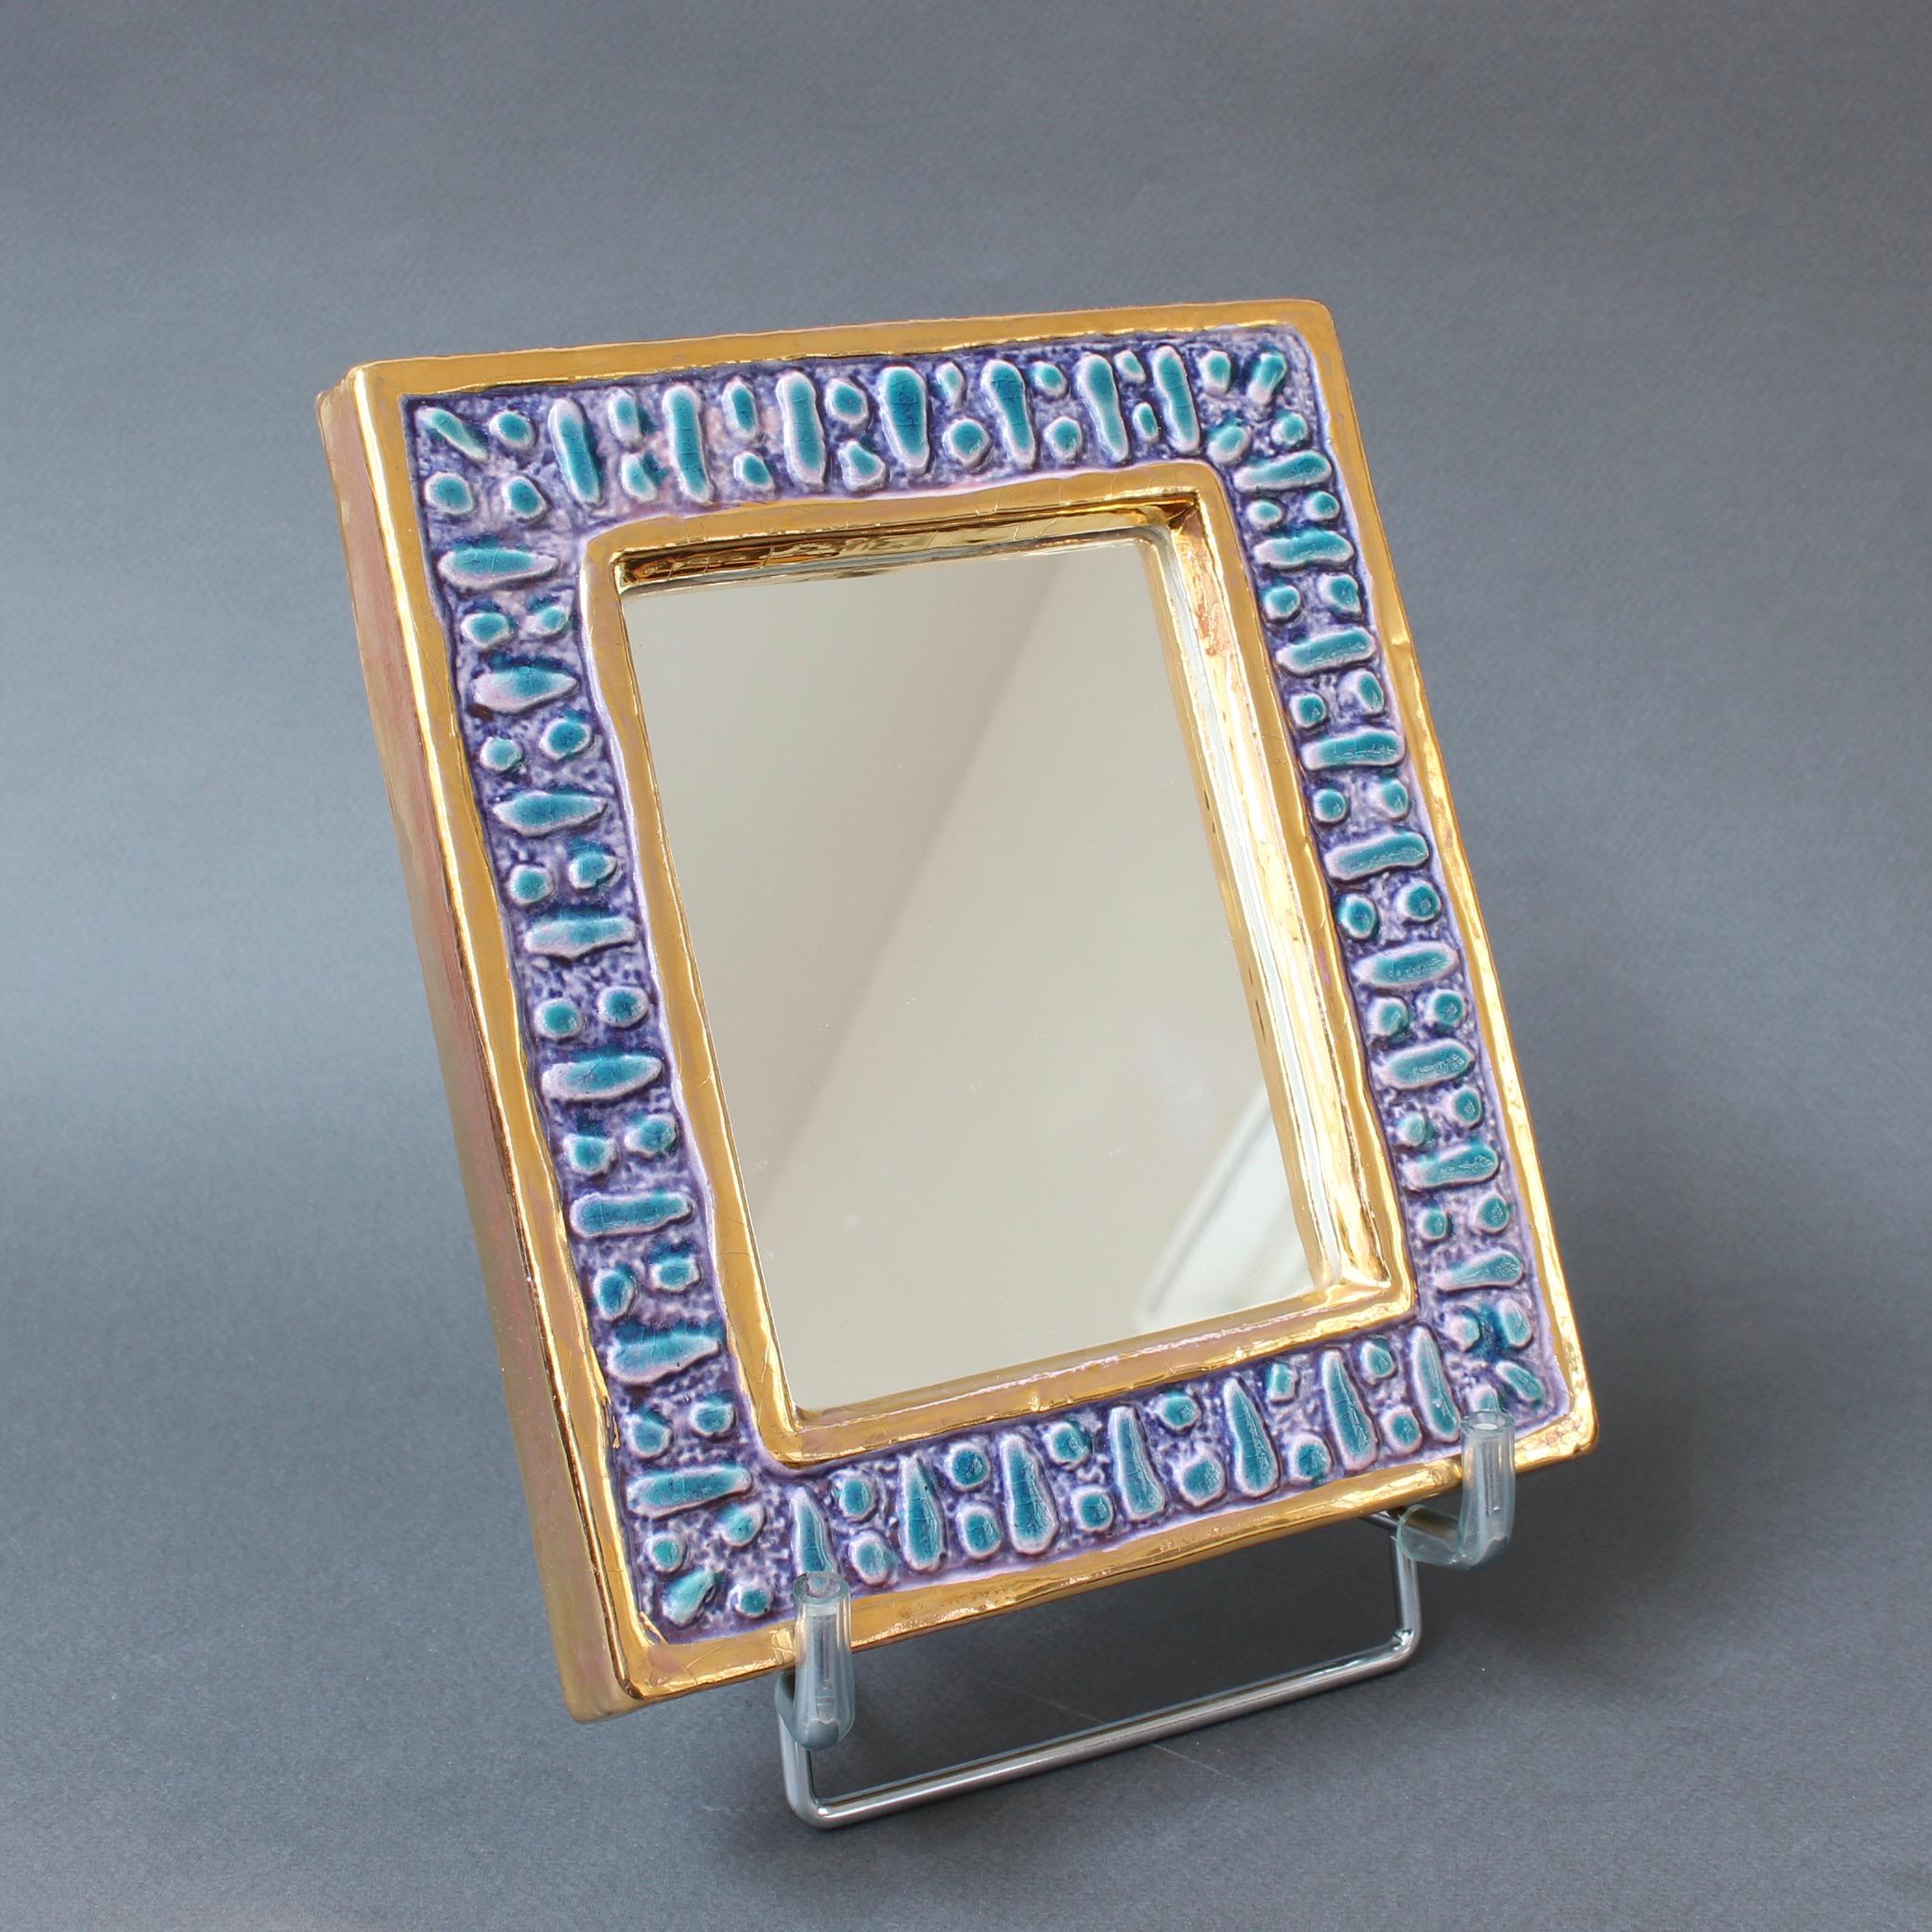 A diminutive ceramic wall mirror with blue enamel glaze and abstract motif (circa 1970s) attributed to François Lembo. A whimsically decorated wall mirror with gold colored inner and outer borders framing a lustrous blue and magenta enamel in a